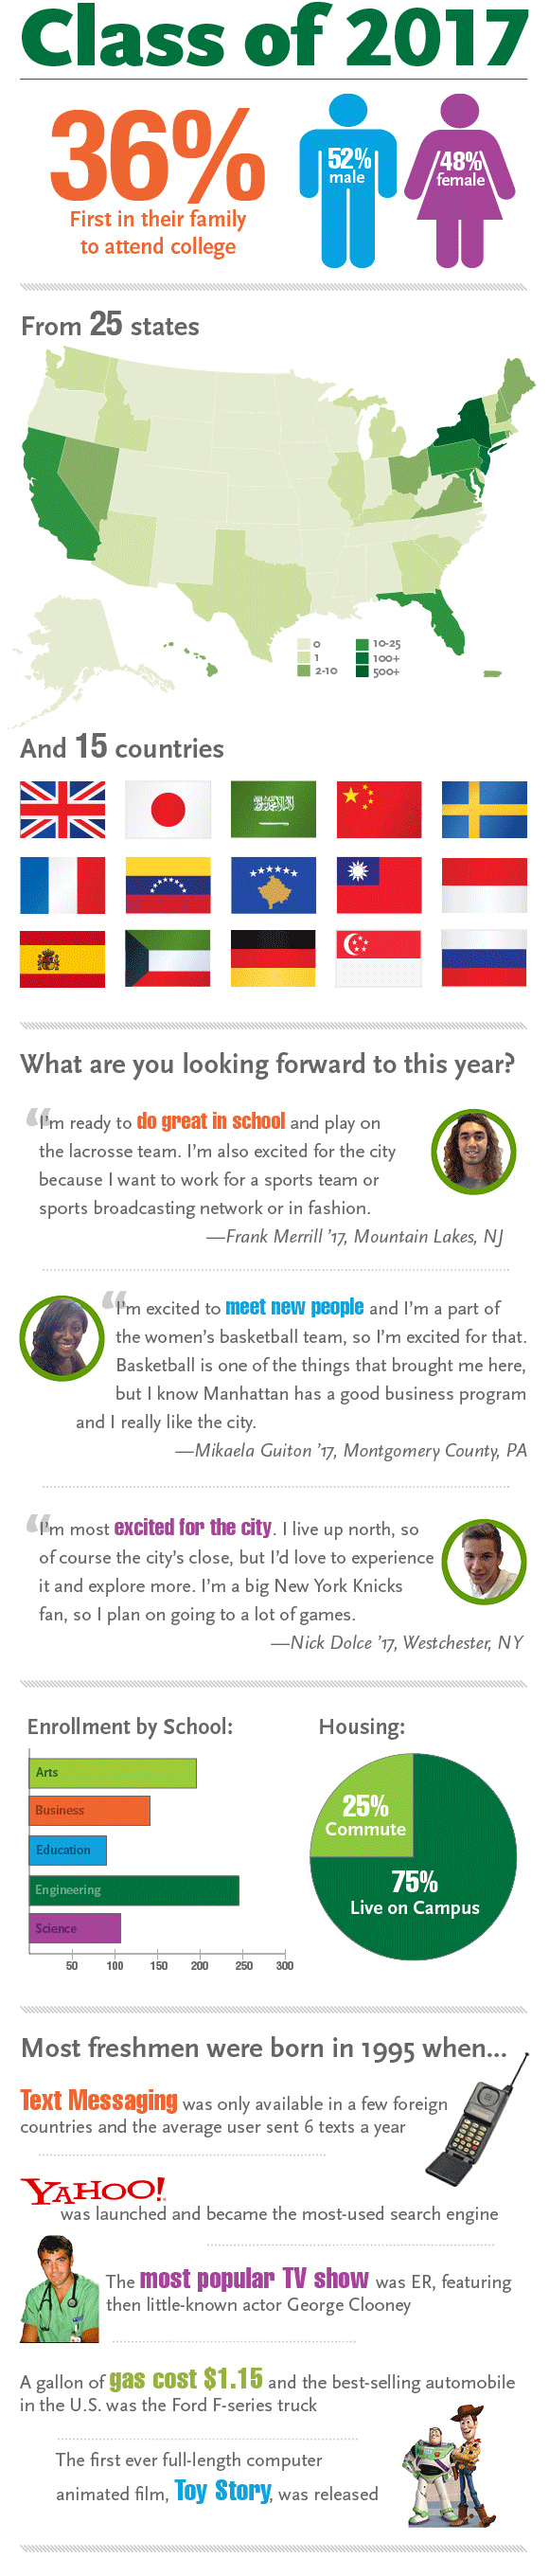 Class of 2017 Infographic 